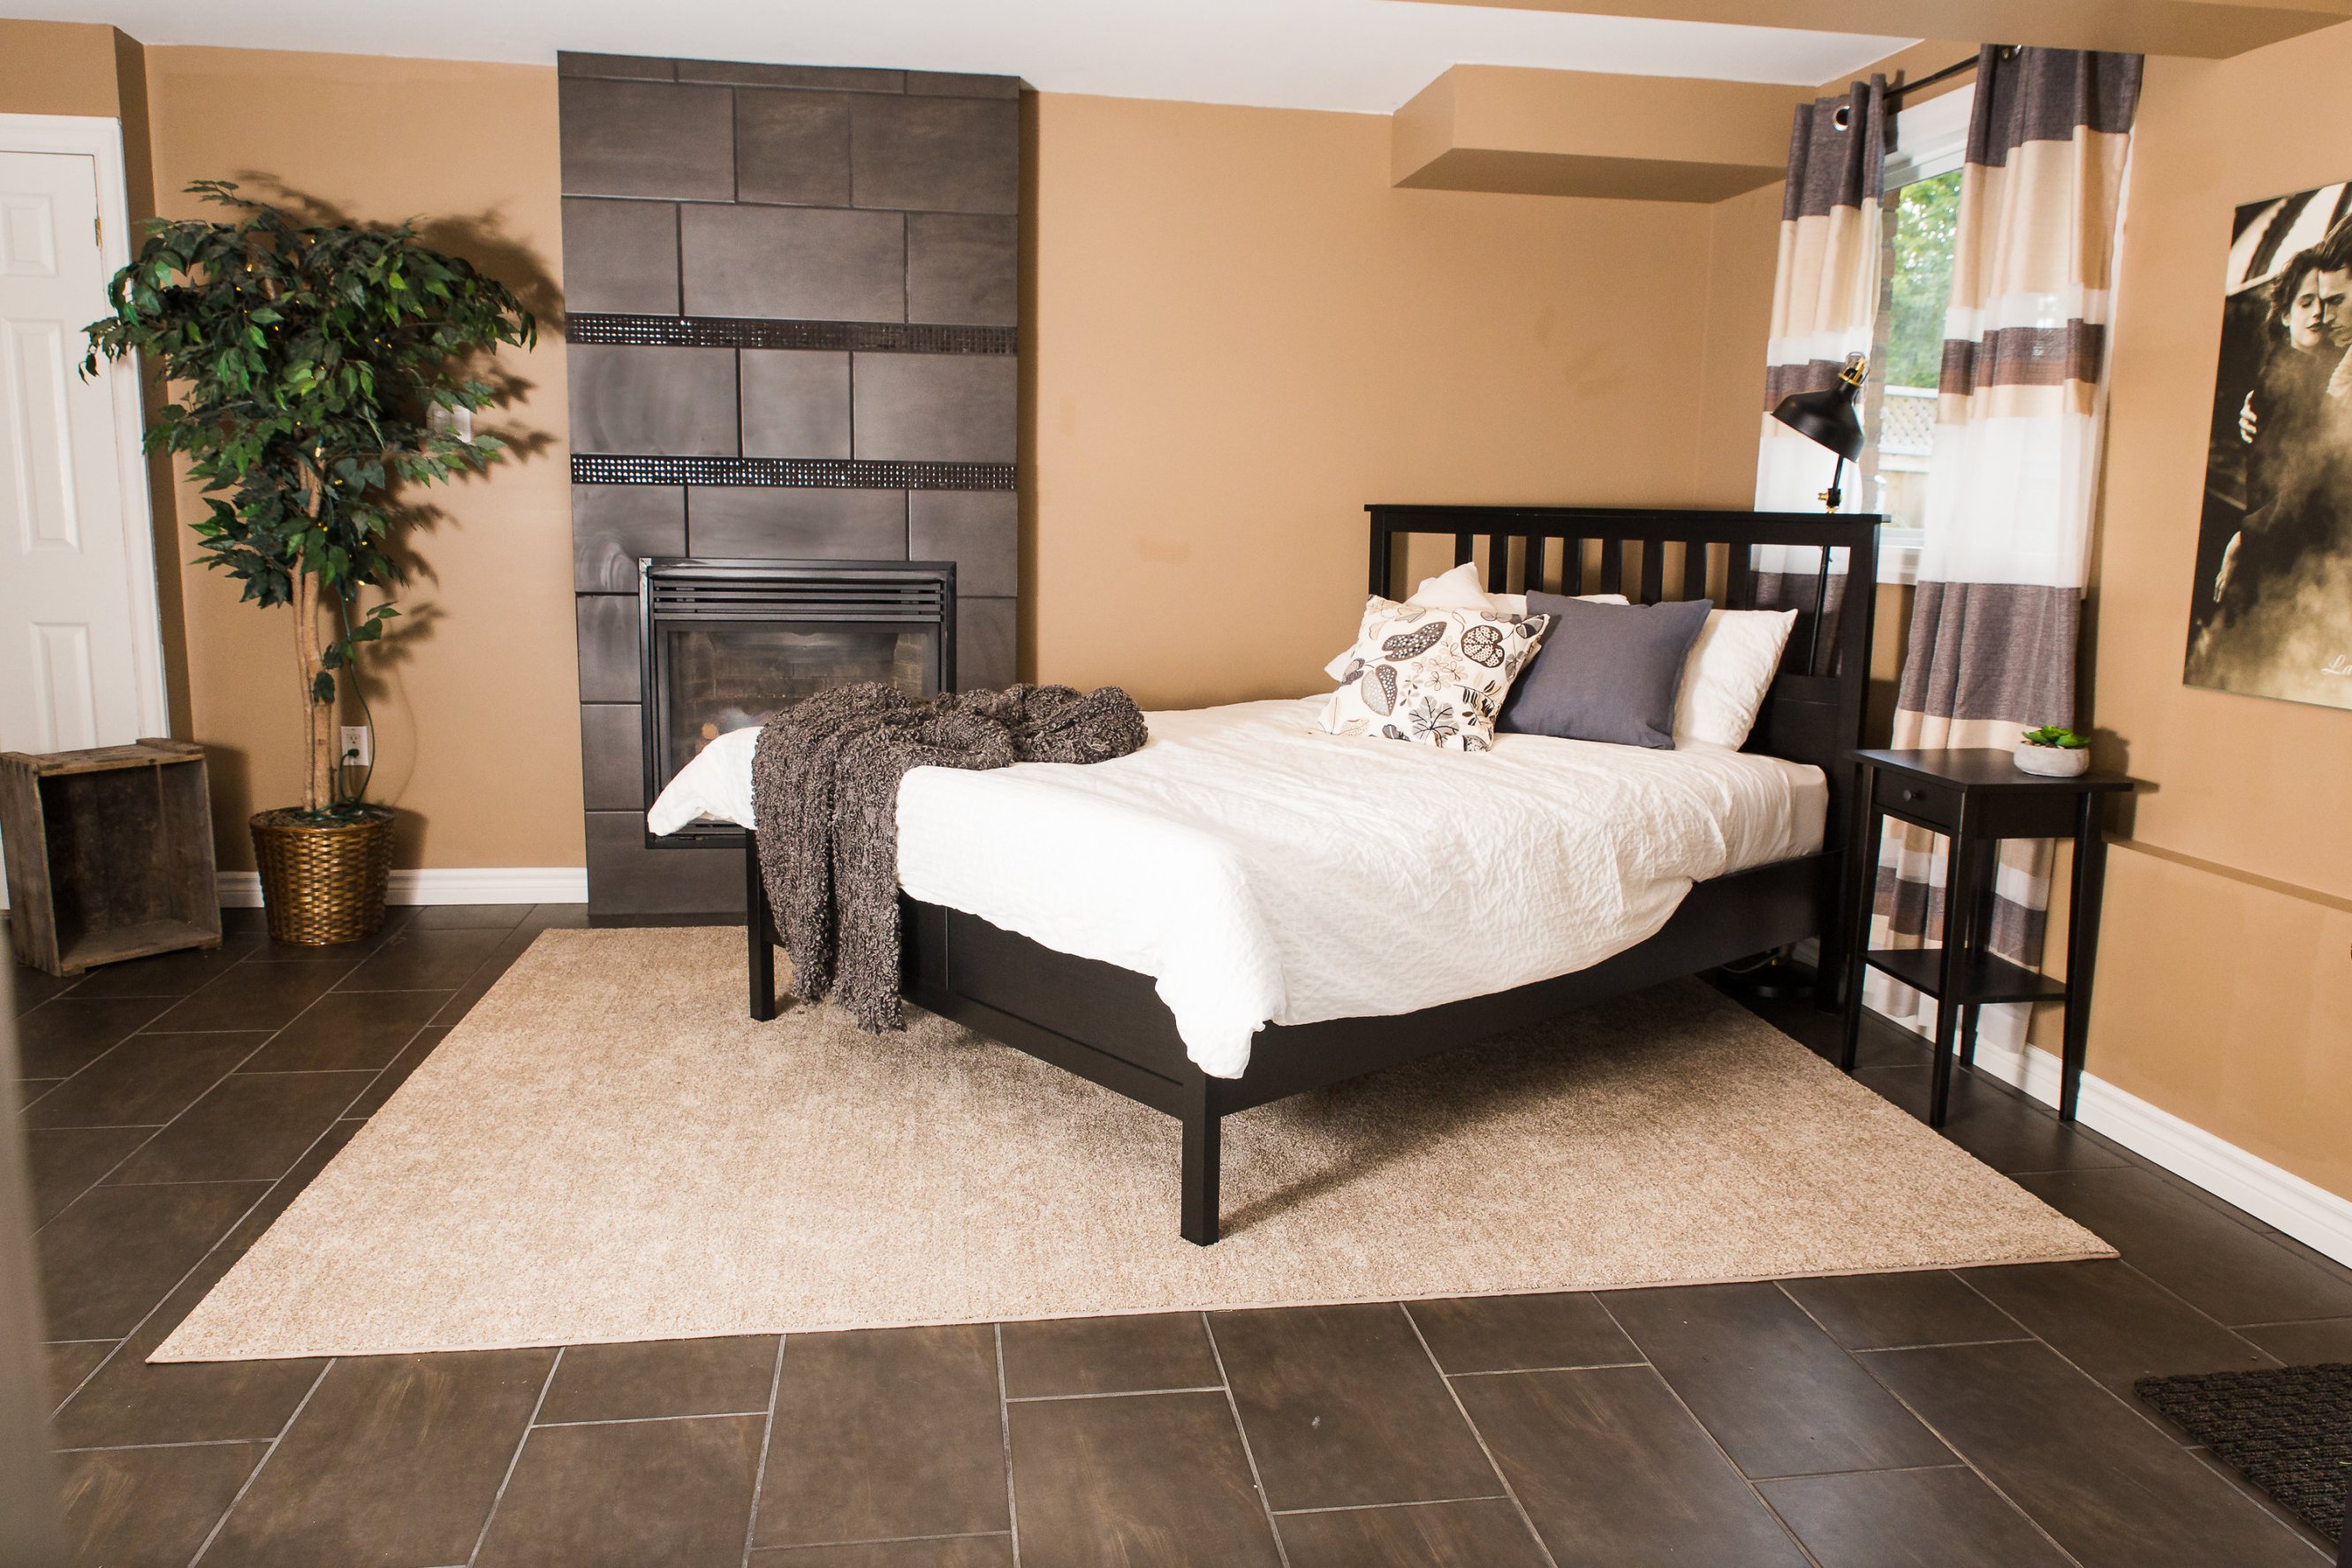 A main bedroom with a cozy fireplace in Orangeville, Ontario. 